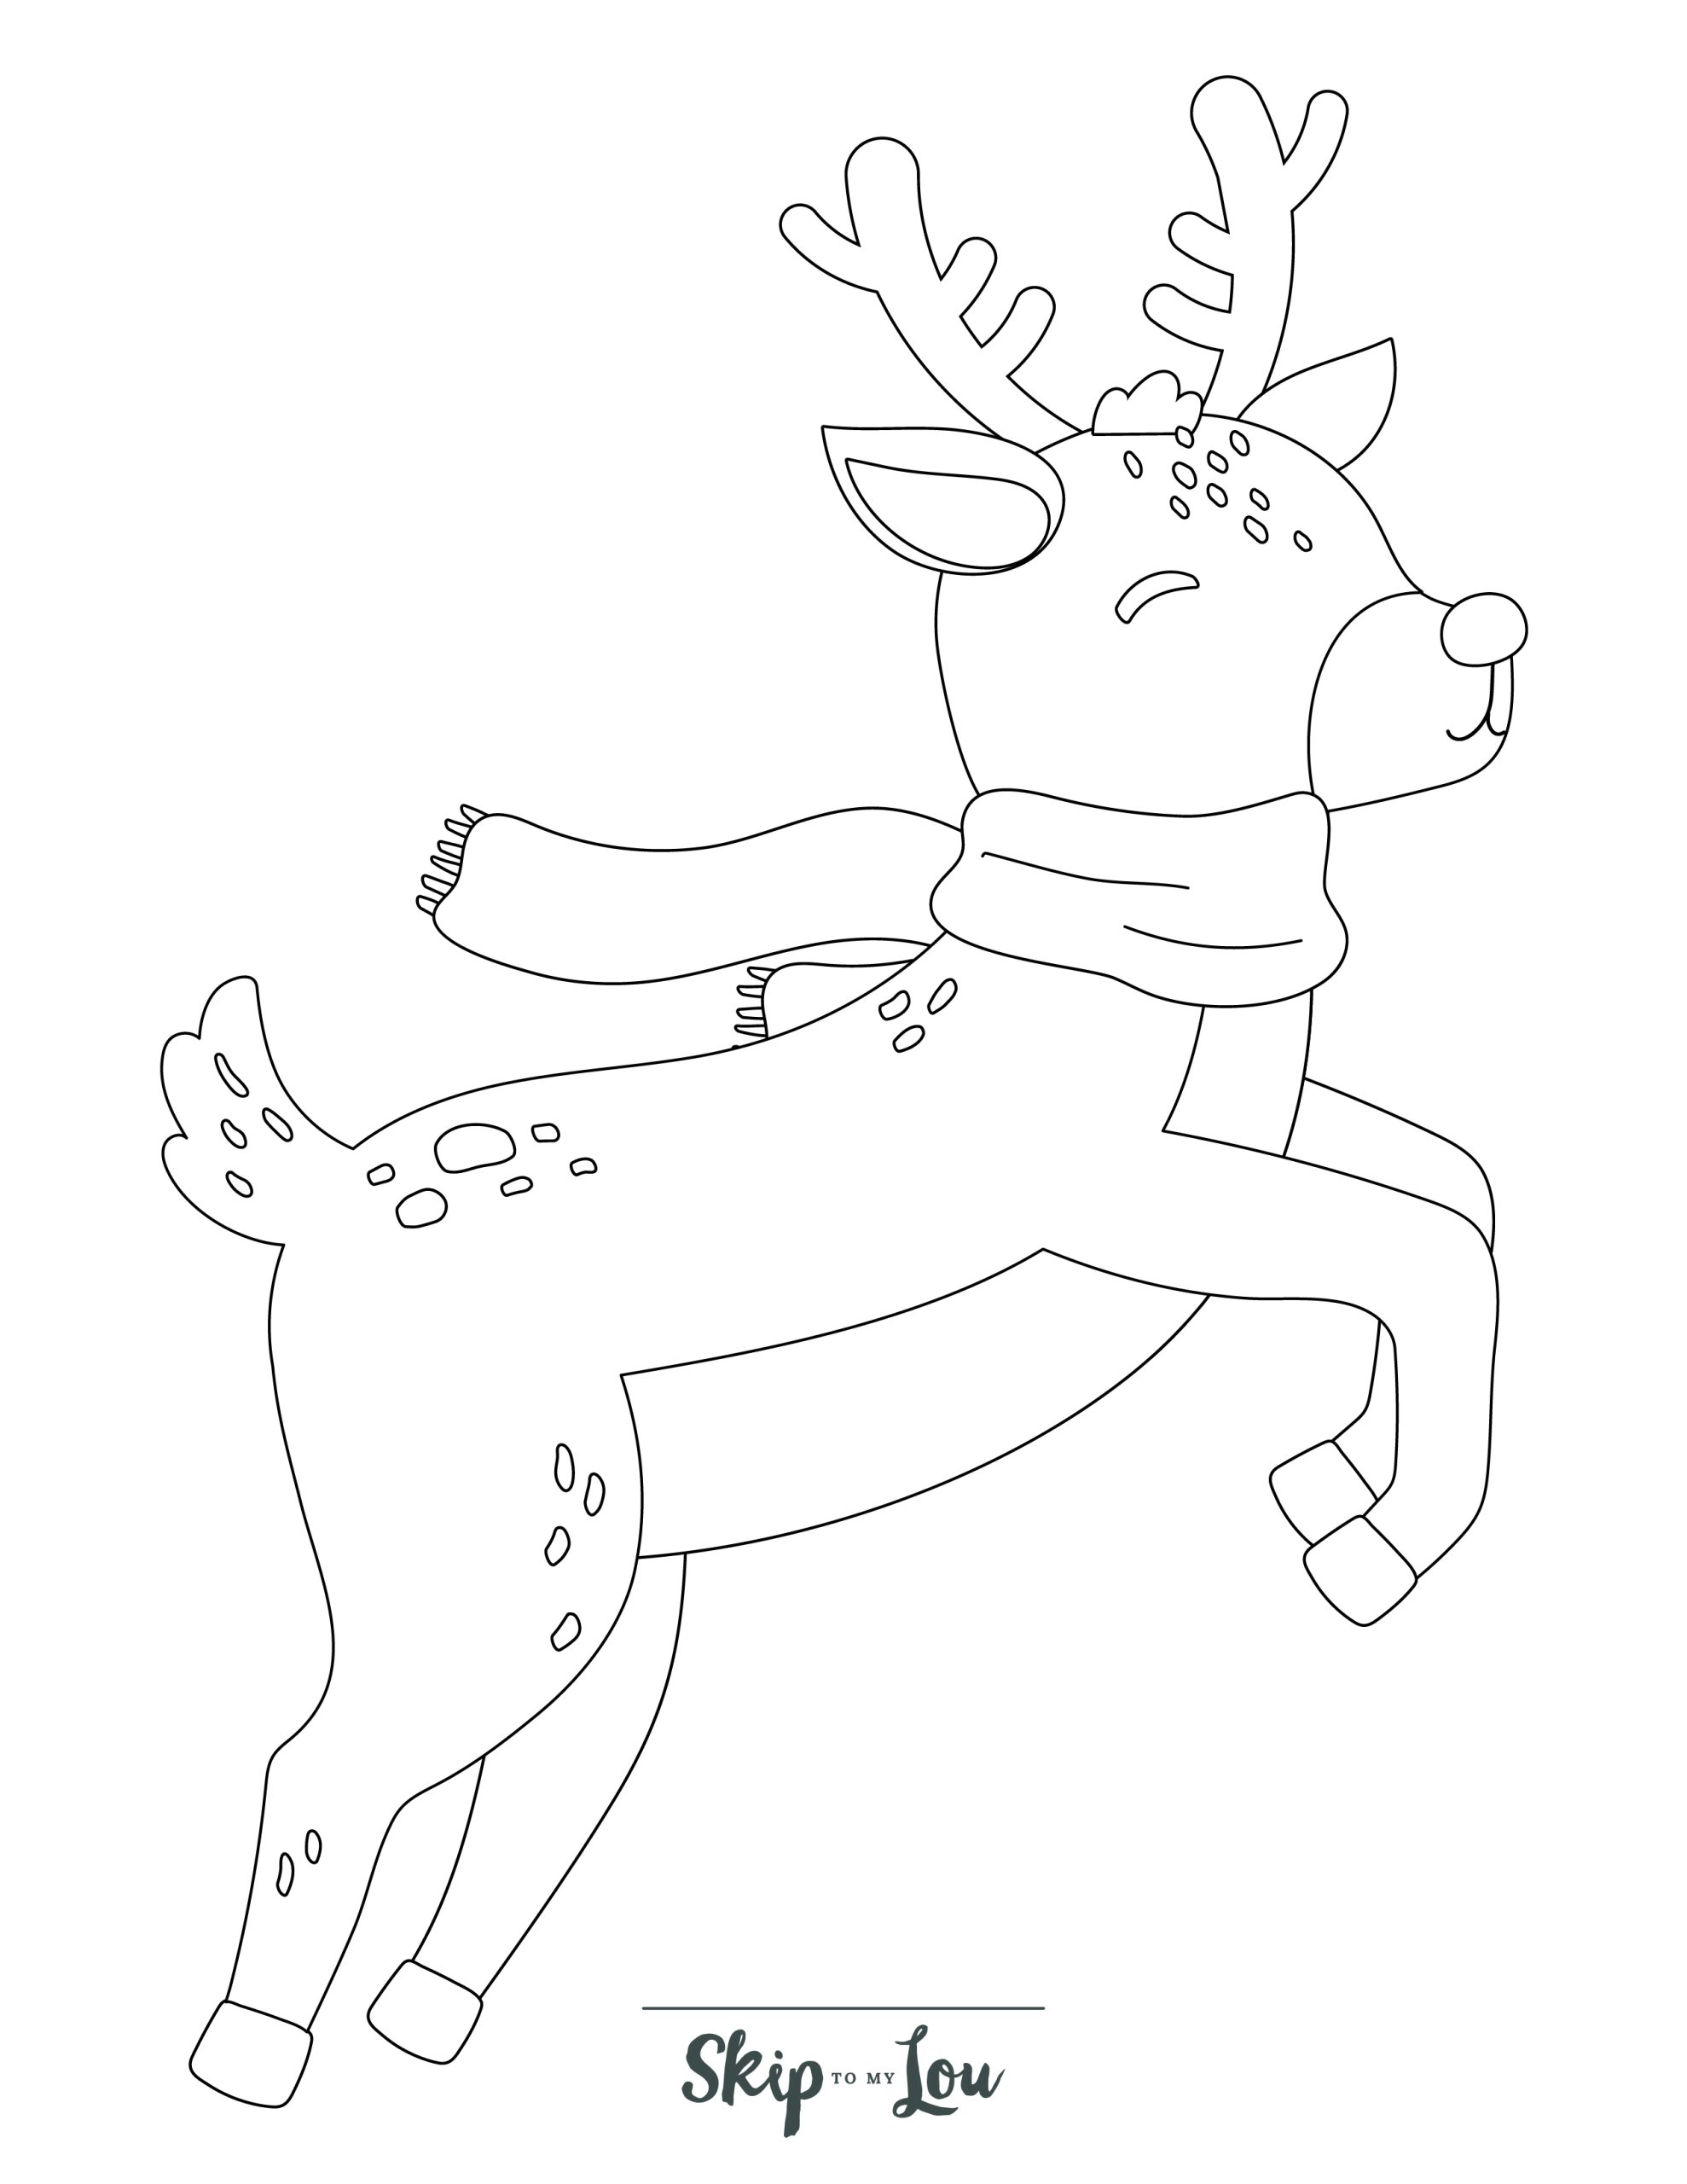 Reindeer Coloring Page 8 - Line drawing of a realistic jumping reindeer 